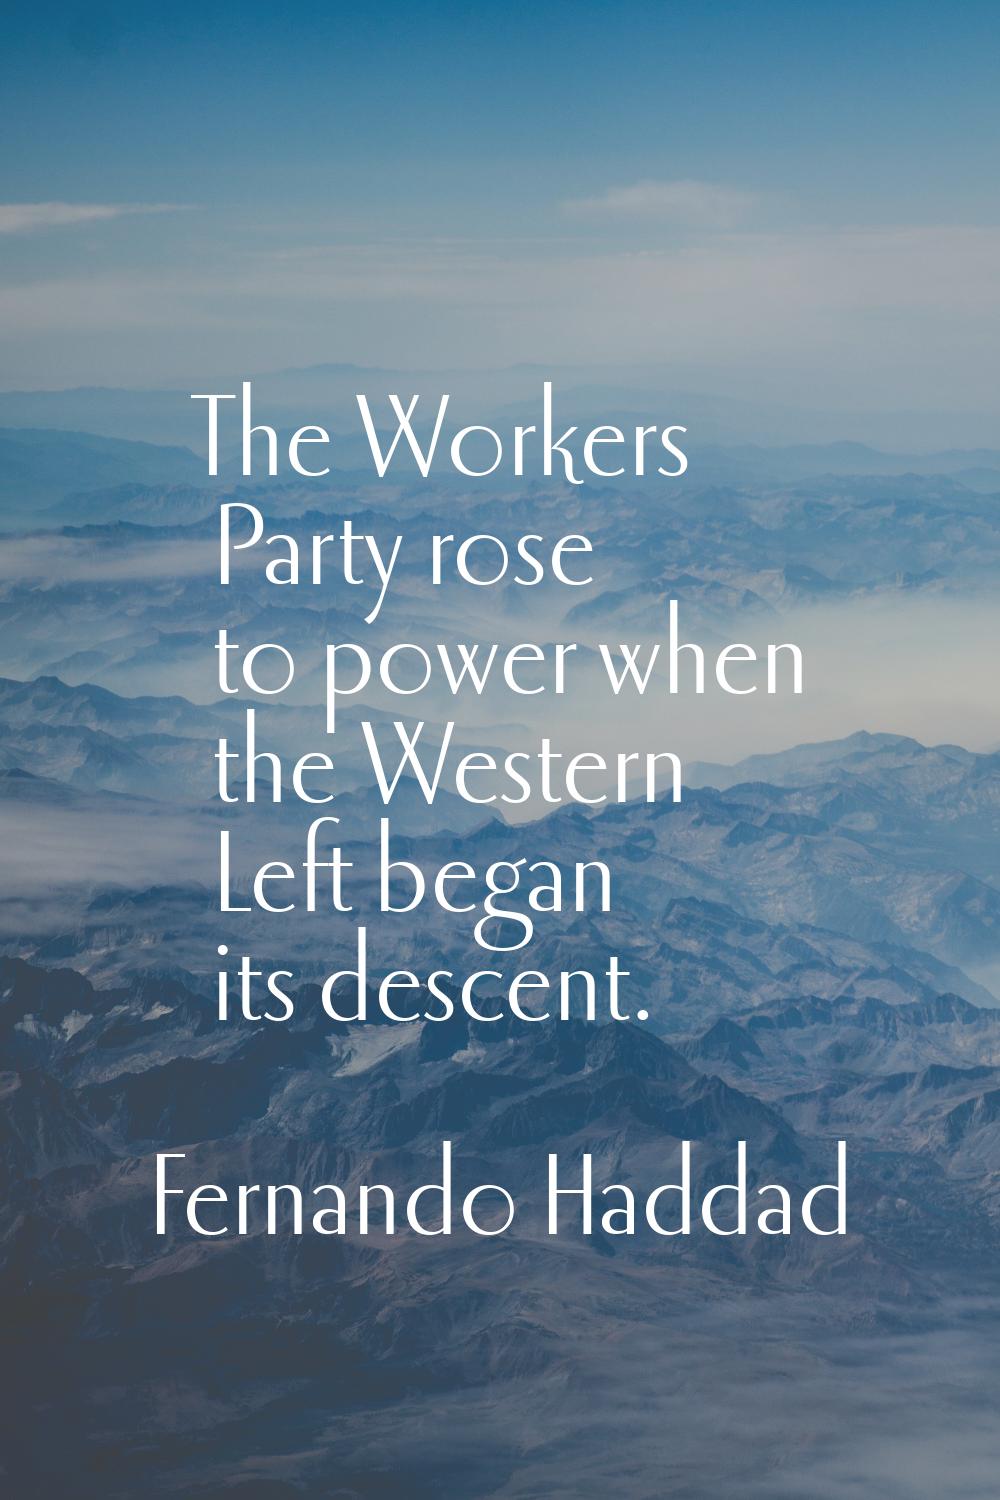 The Workers Party rose to power when the Western Left began its descent.